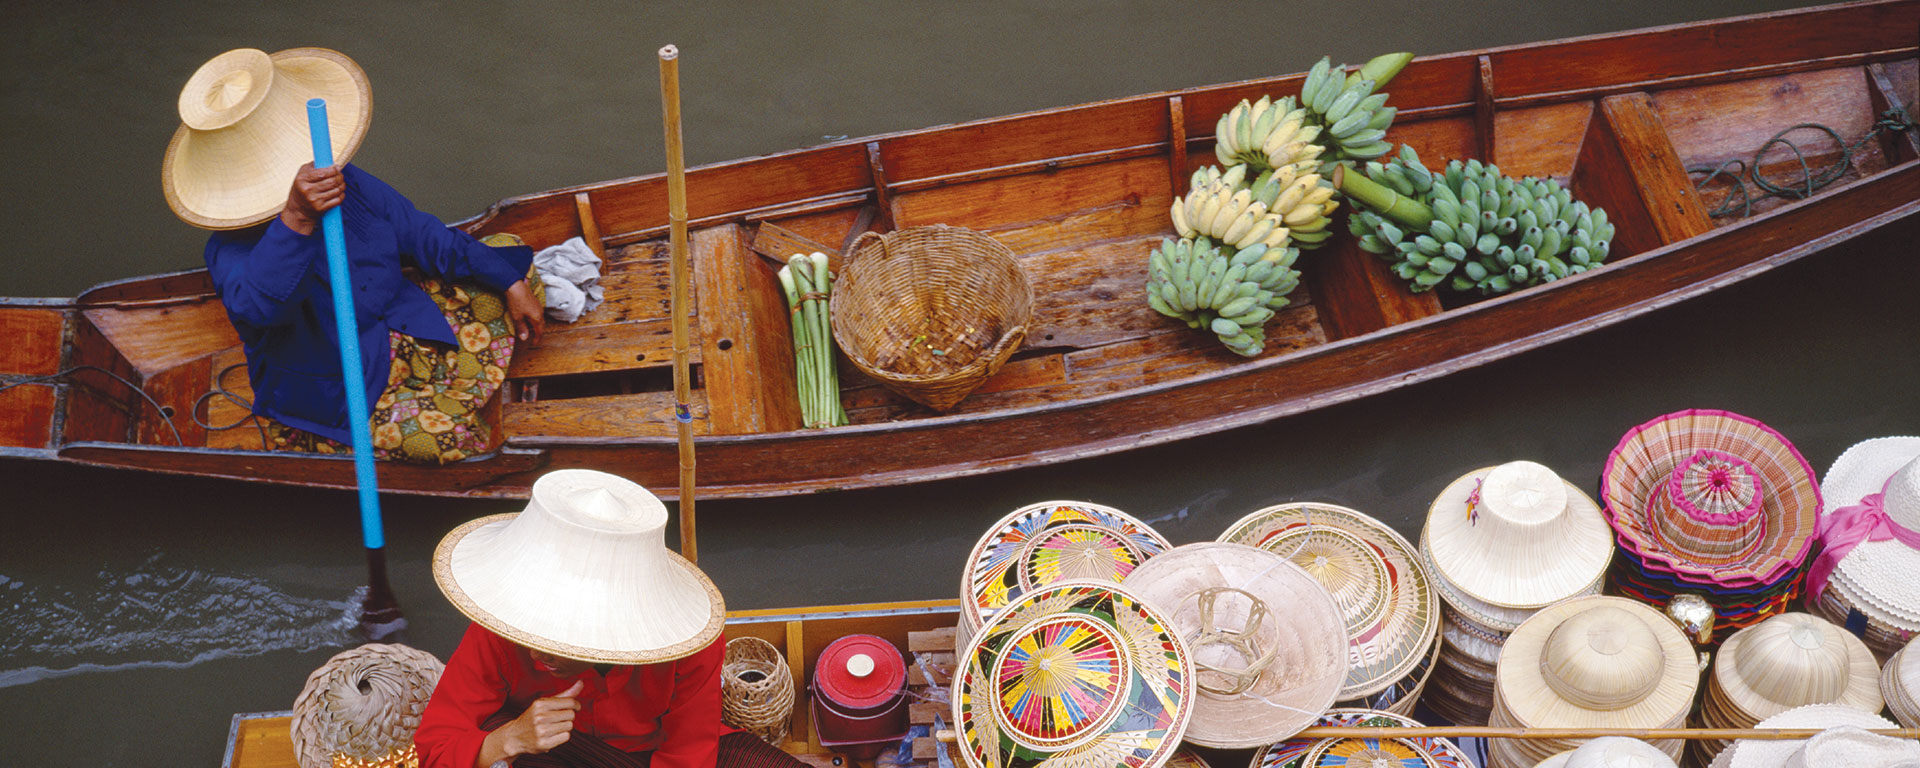 Two people in boats filled with produce and good